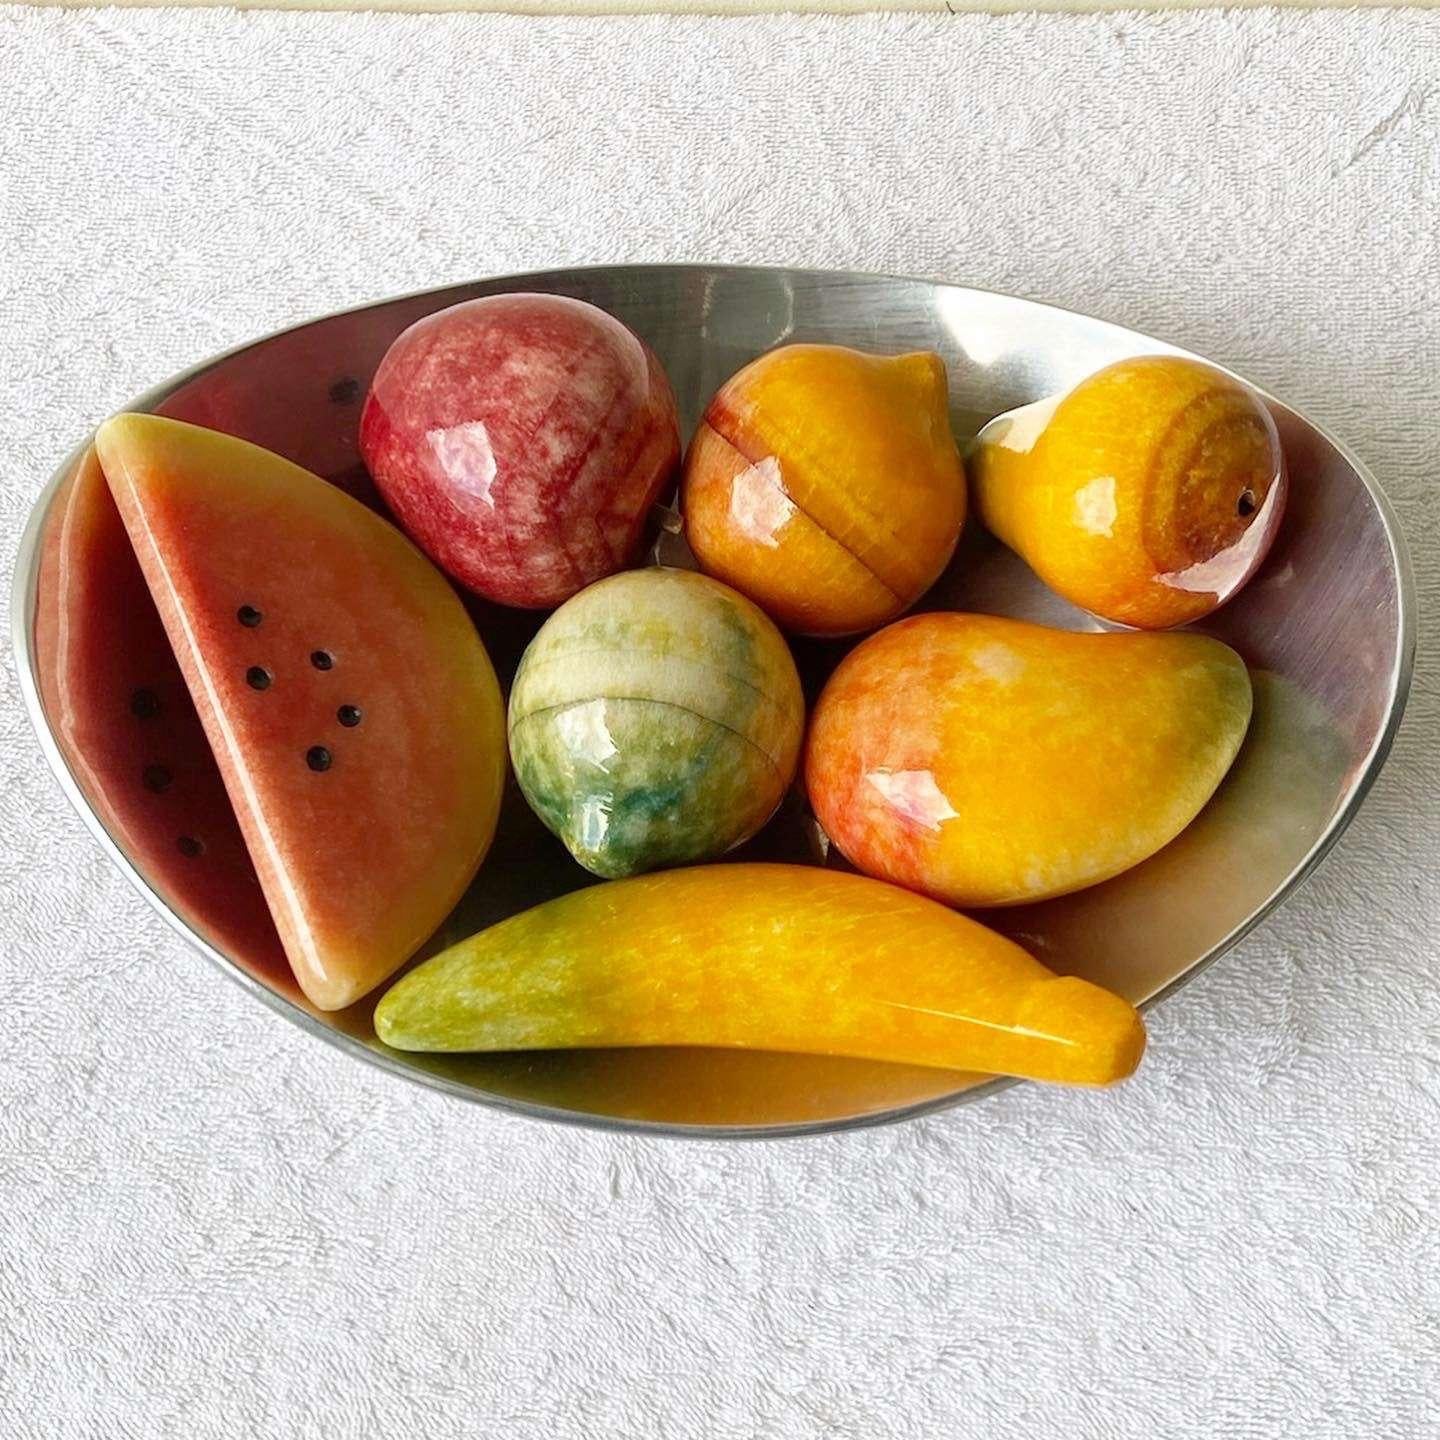 Amazing vintage marble fruit in platter. We’ve got a watermelon, banana, pear, mango and more!

Fruits range in size from 3” to 6”W
